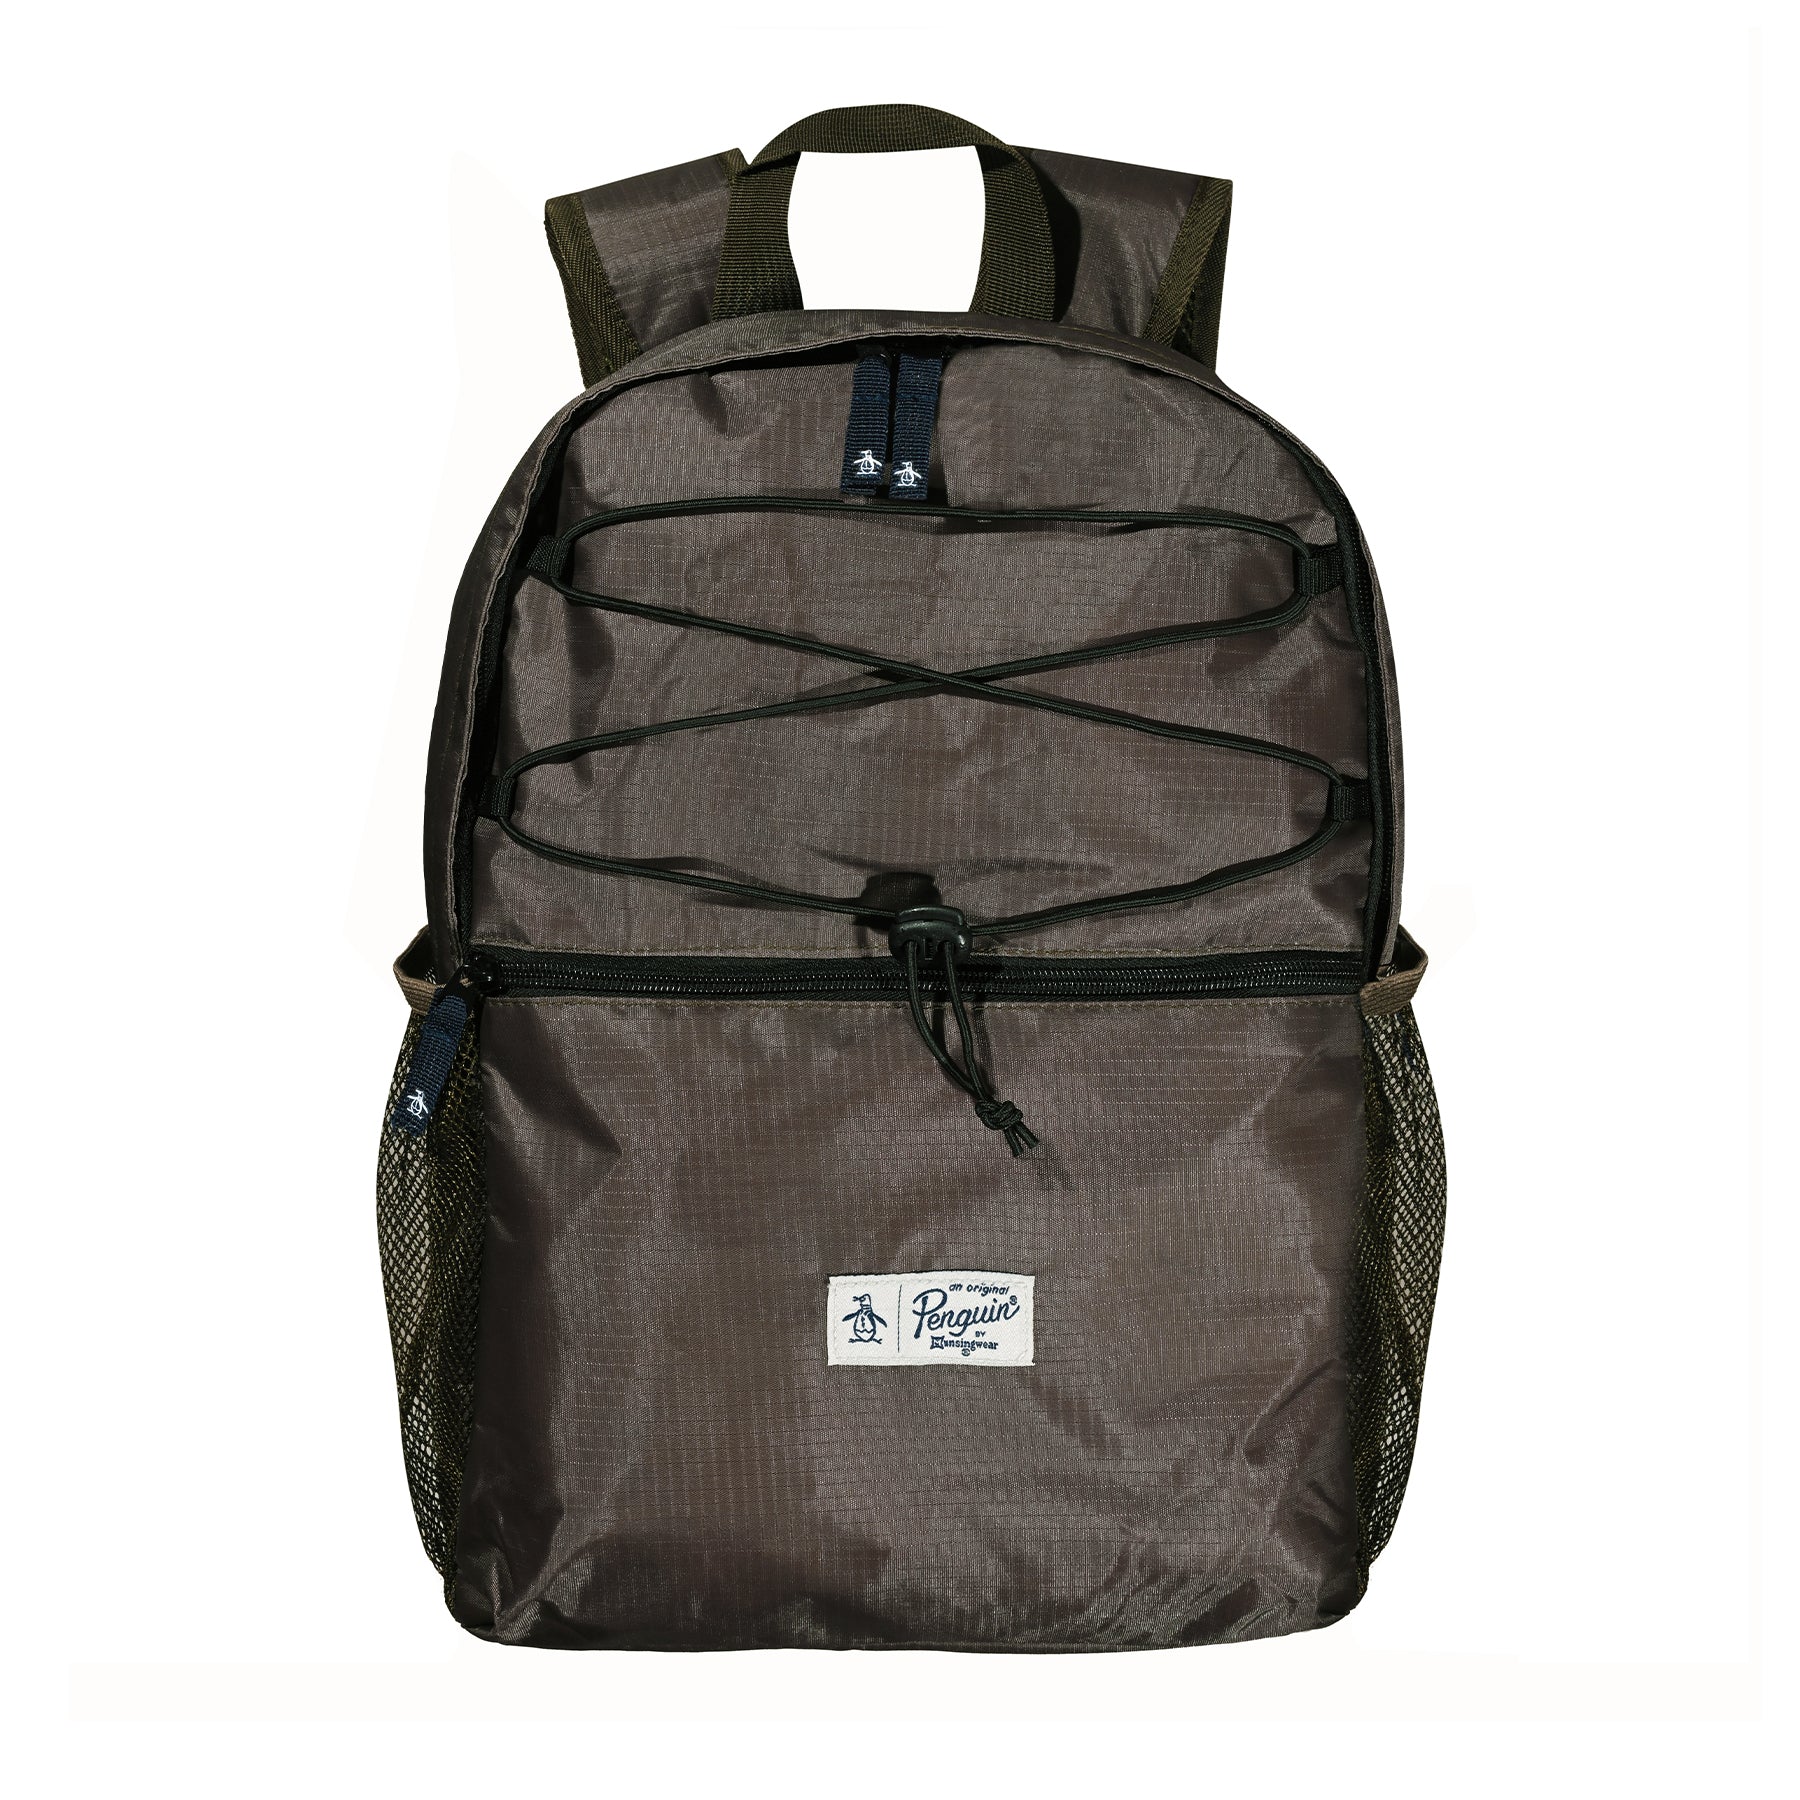 View Nessa Rip Stop Backpack With Bungee Cord In Olive information